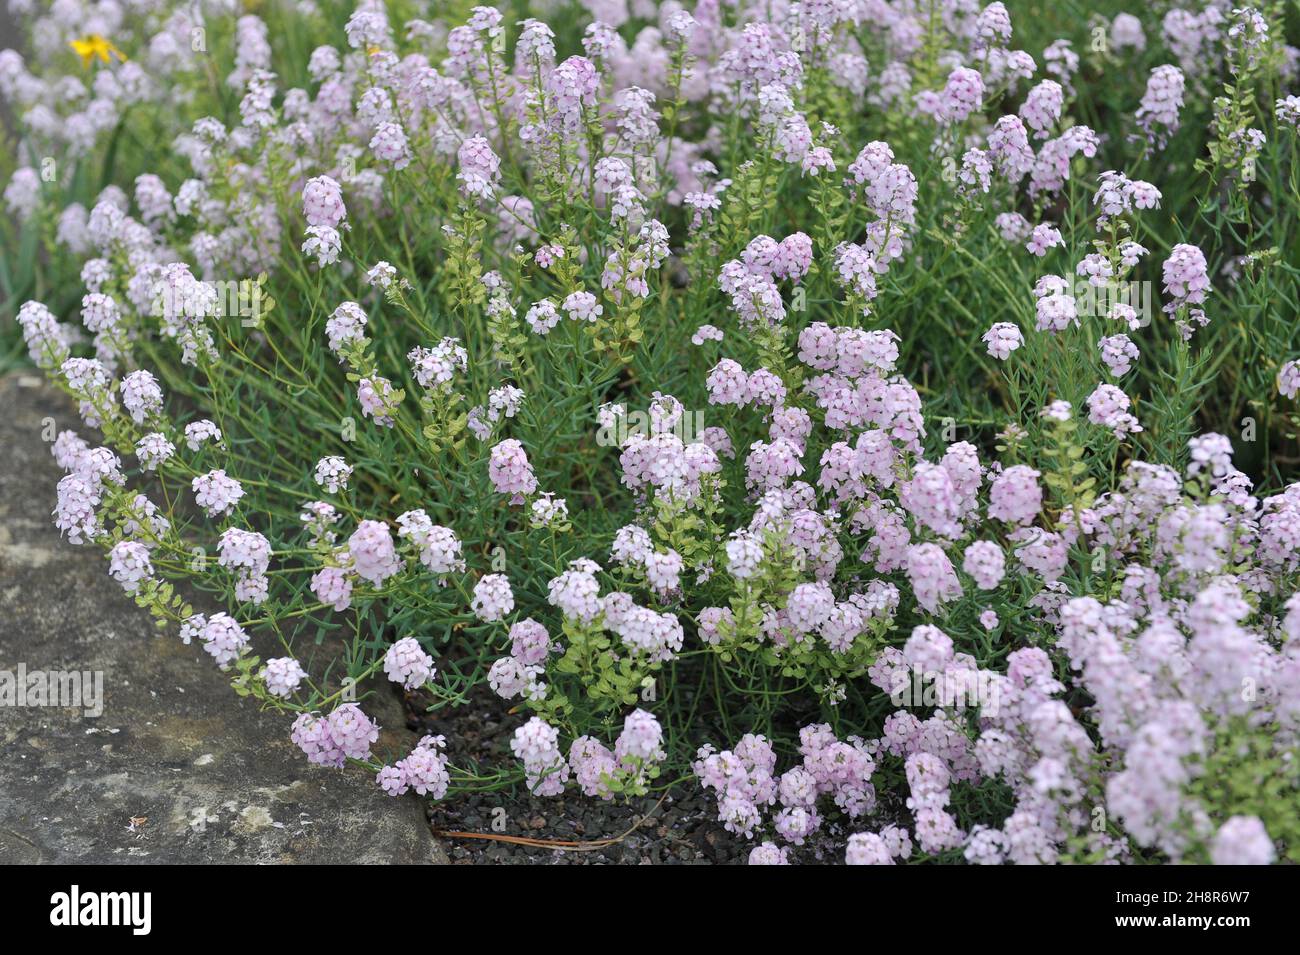 Stonecress (Aethionema armenum) blooms in a stone garden in May Stock Photo